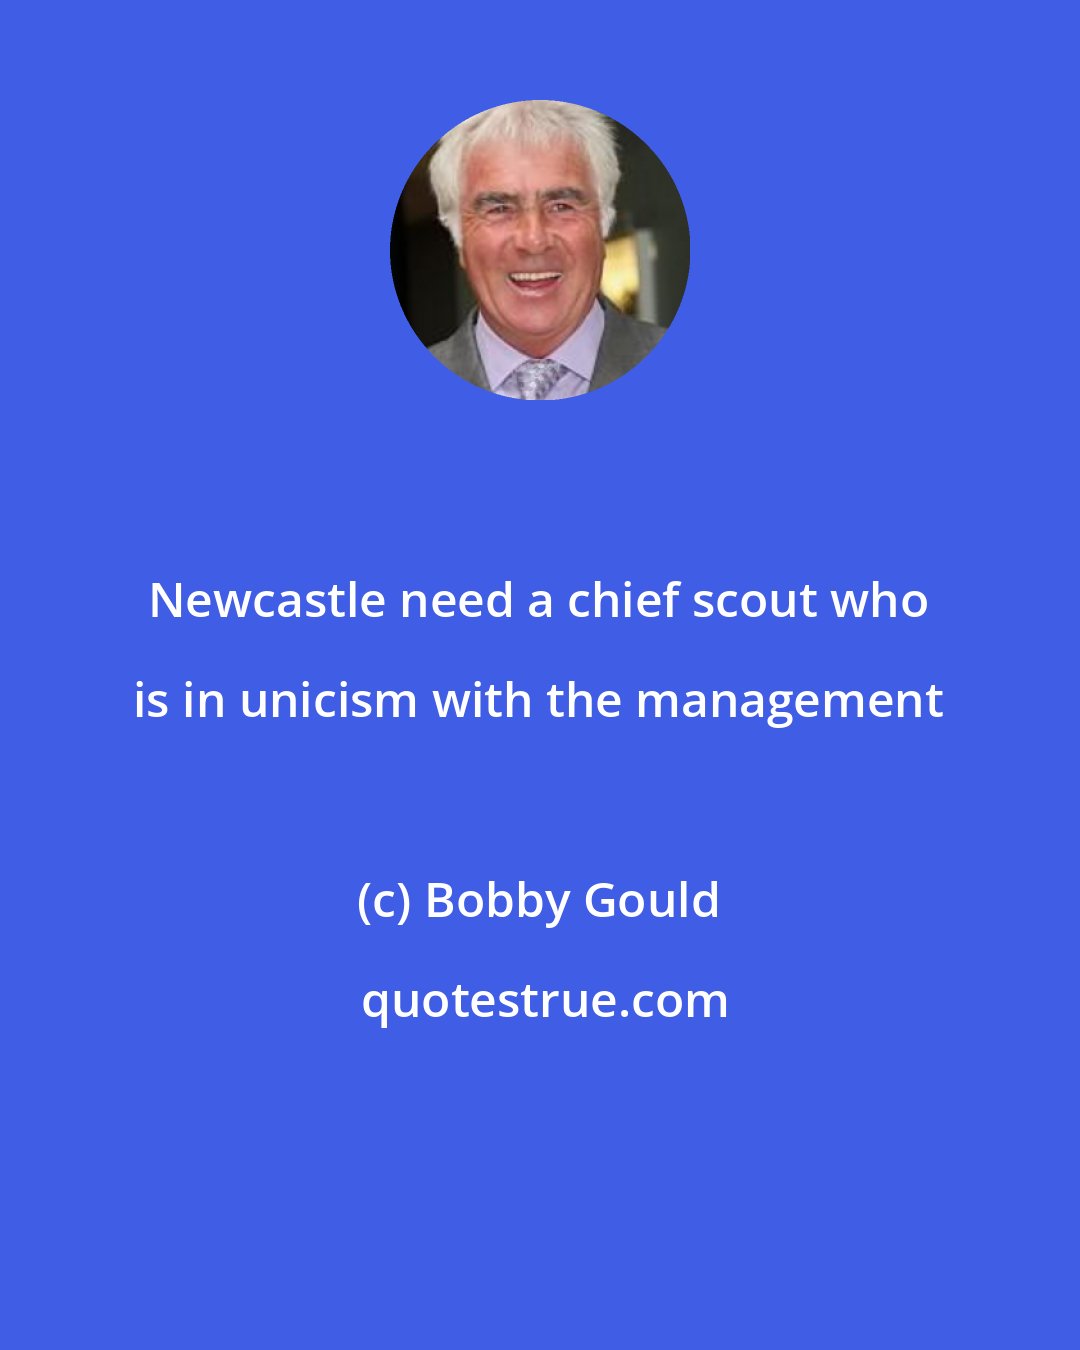 Bobby Gould: Newcastle need a chief scout who is in unicism with the management